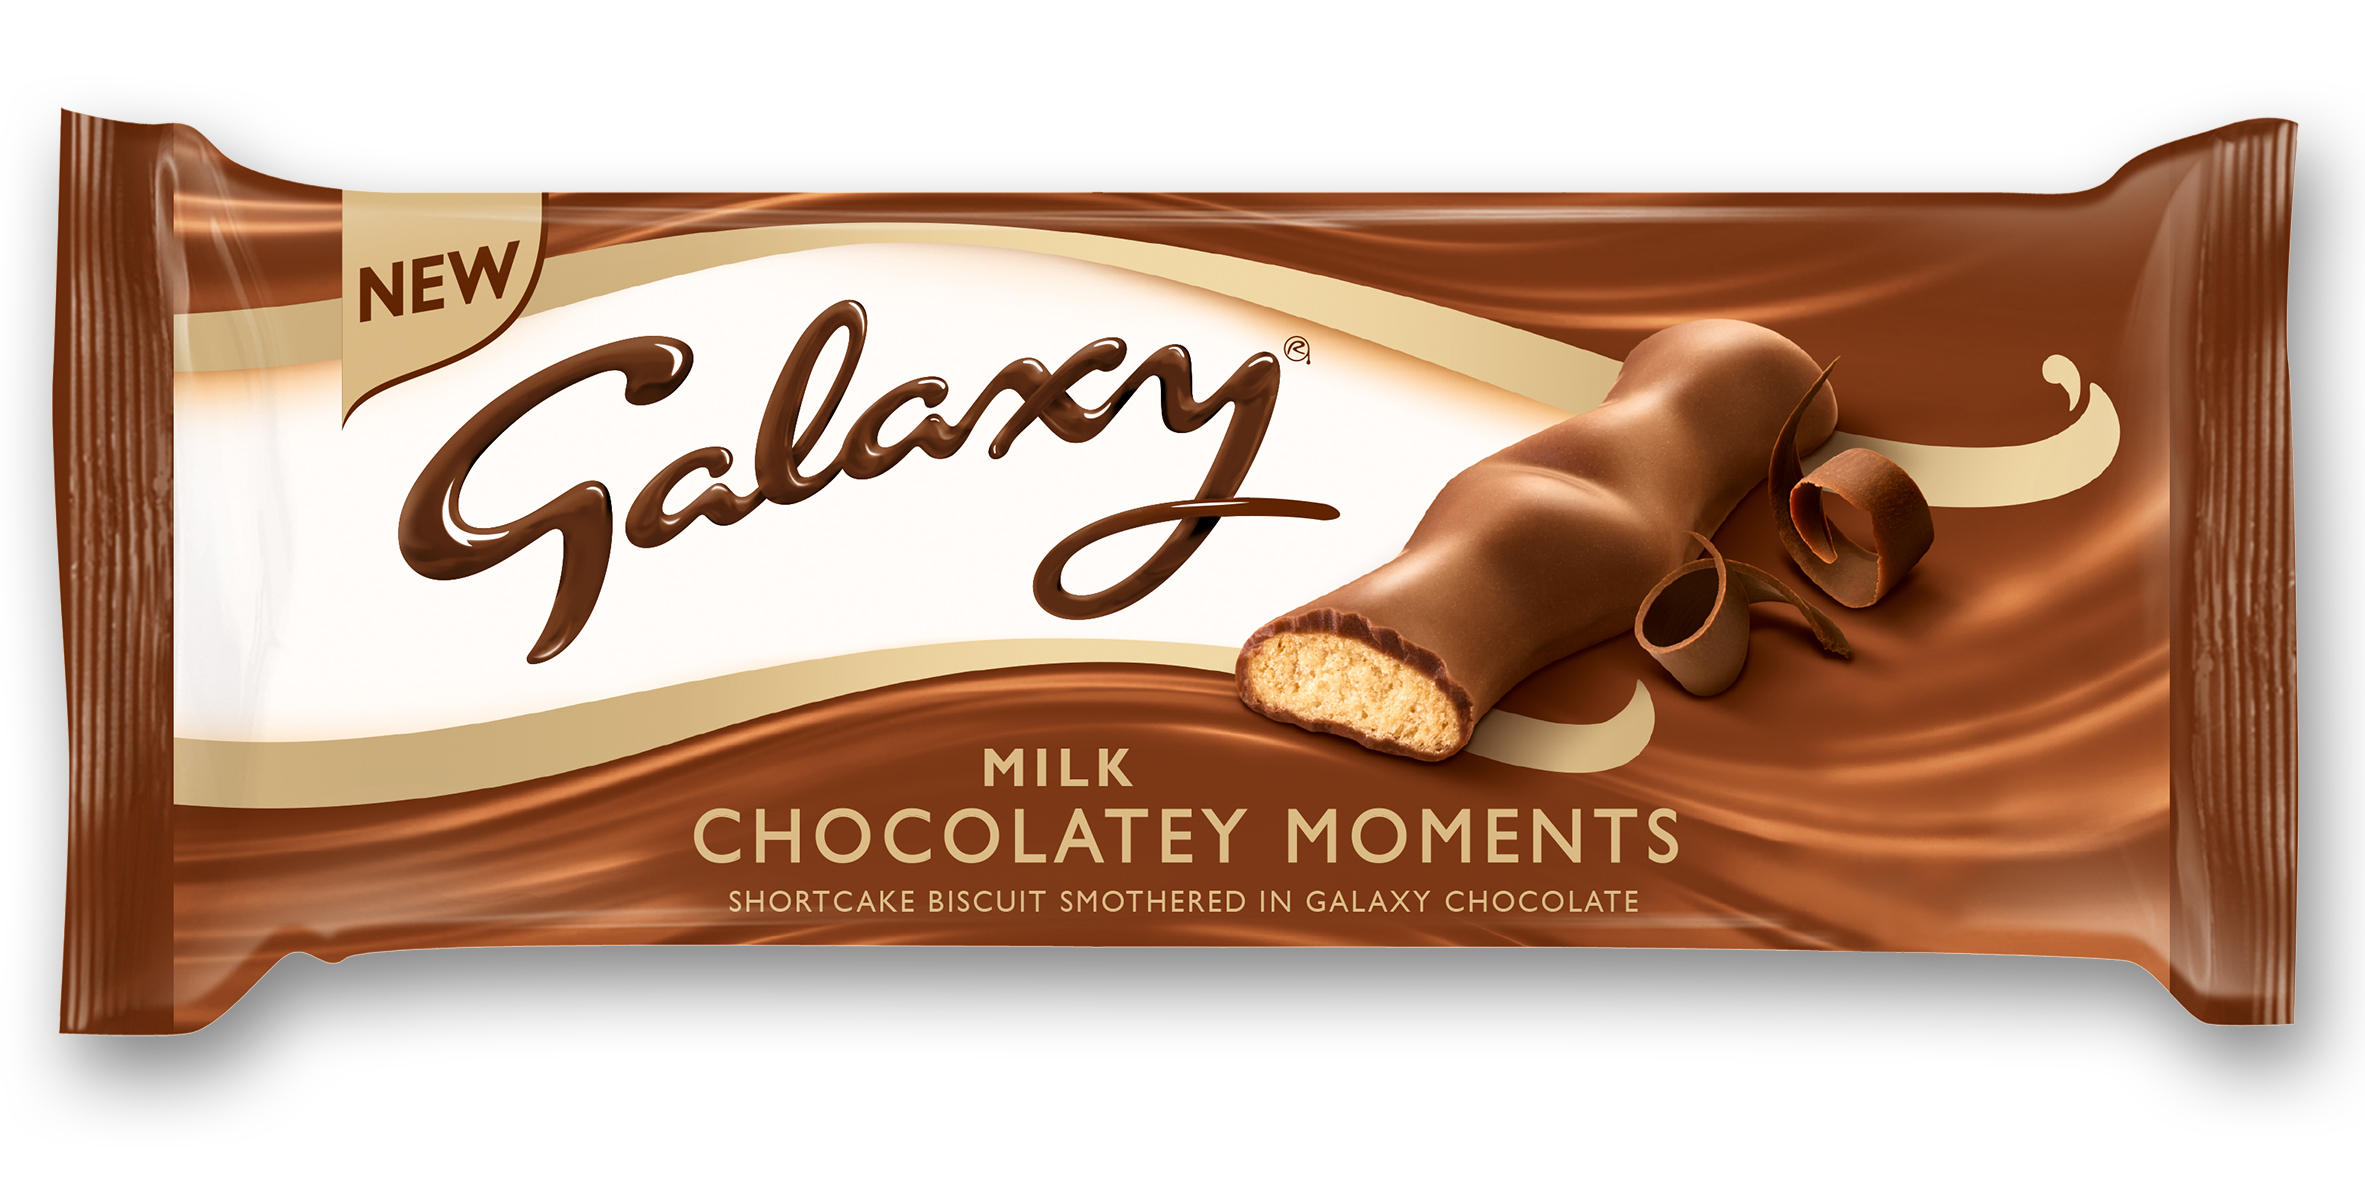 Mars Chocolate Drinks and Treats launch new Galaxy biscuit bar